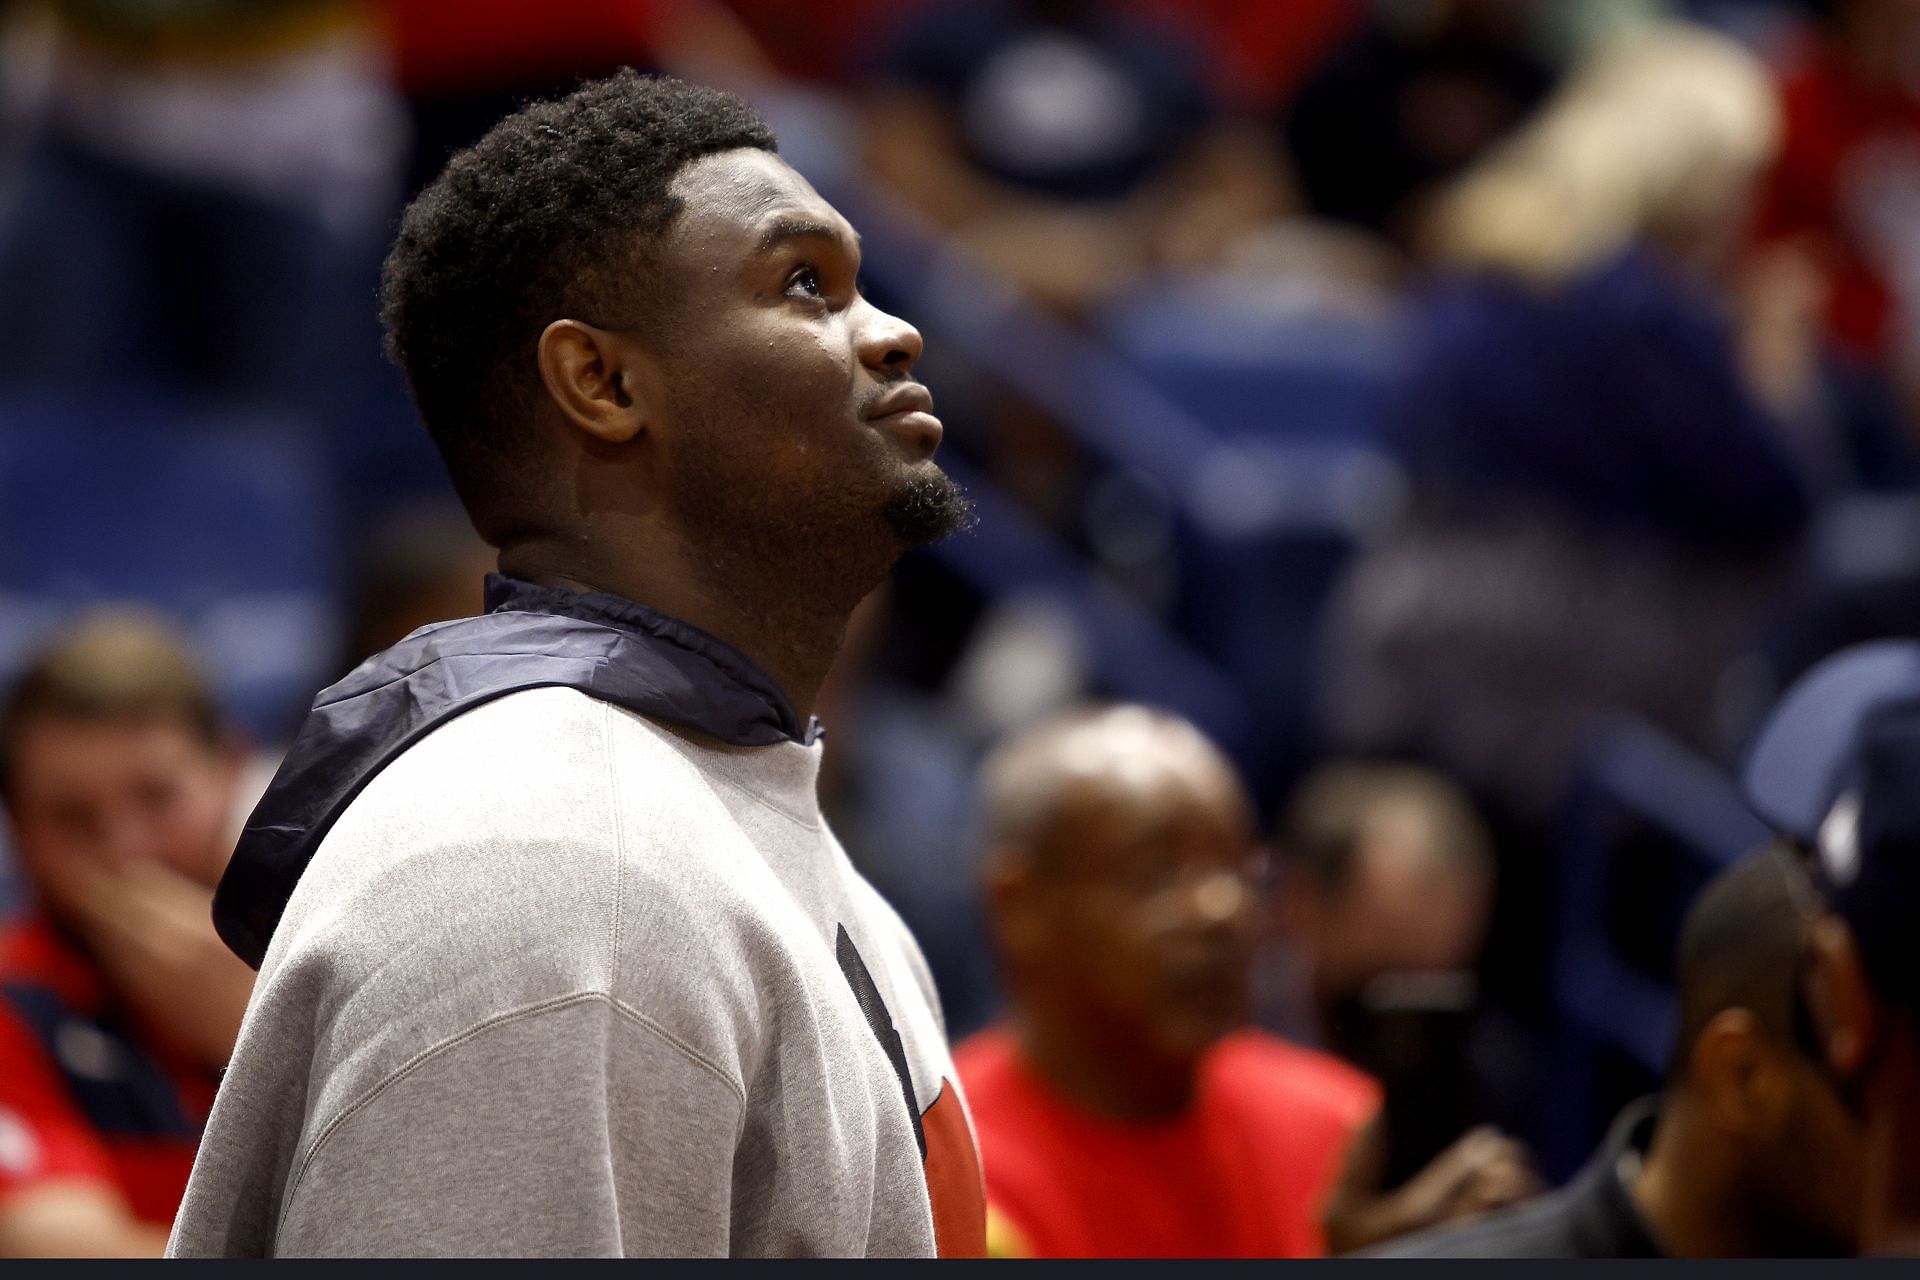 Zion Williamson #1 of the New Orleans Pelicans stands on the court during the first quarter of an NBA game against the Phoenix Suns at Smoothie King Center on March 15, 2022 in New Orleans, Louisiana.